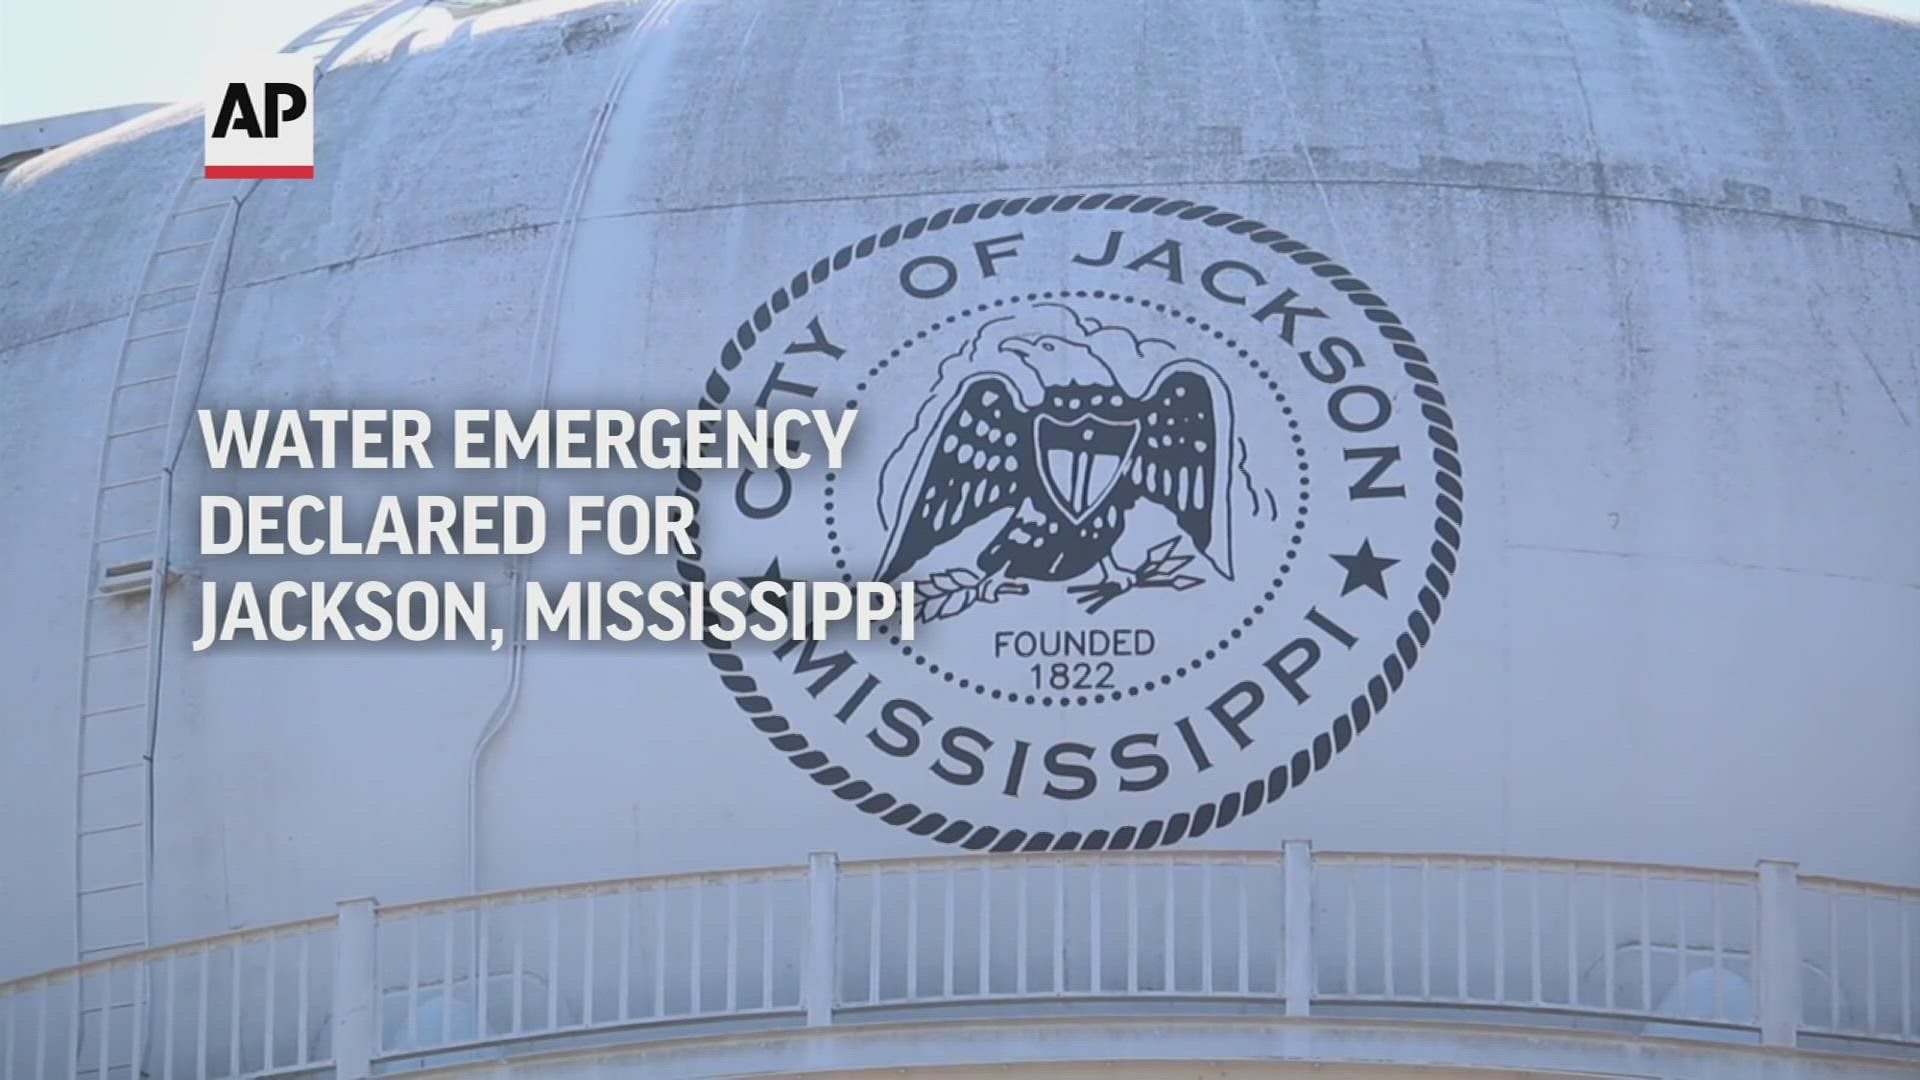 Parts of Jackson were without running water Tuesday because flooding worsened problems in one of two water-treatment plants.